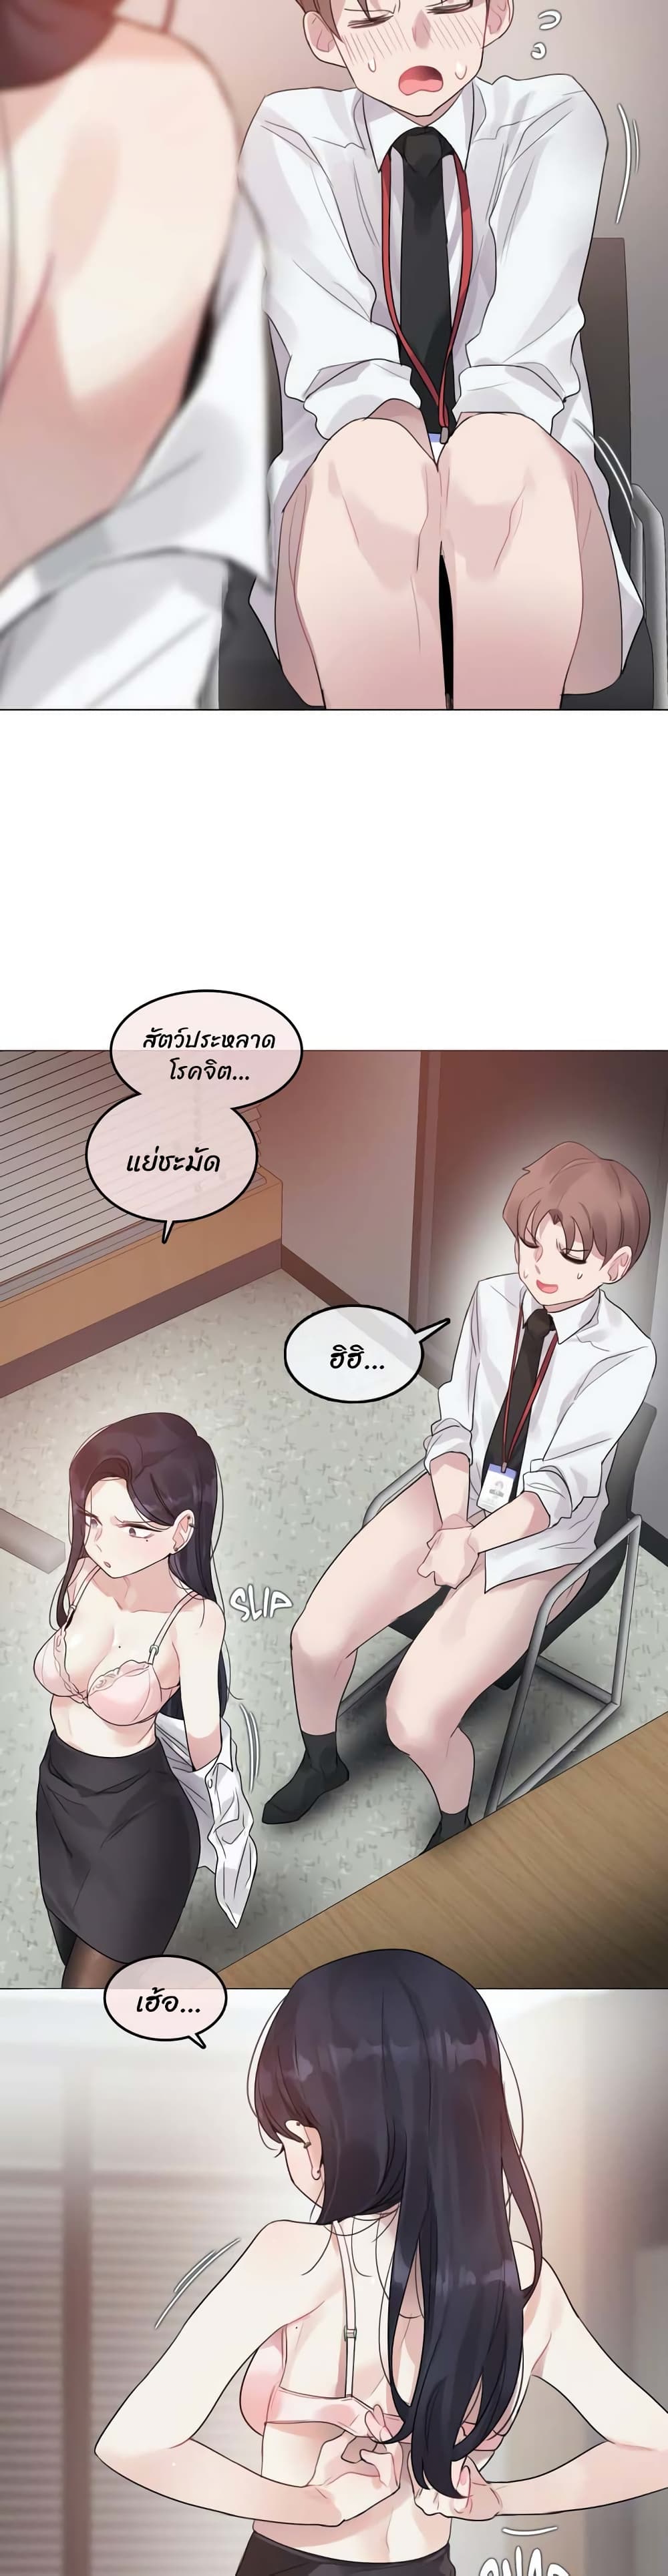 A Pervert's Daily Life 97-97